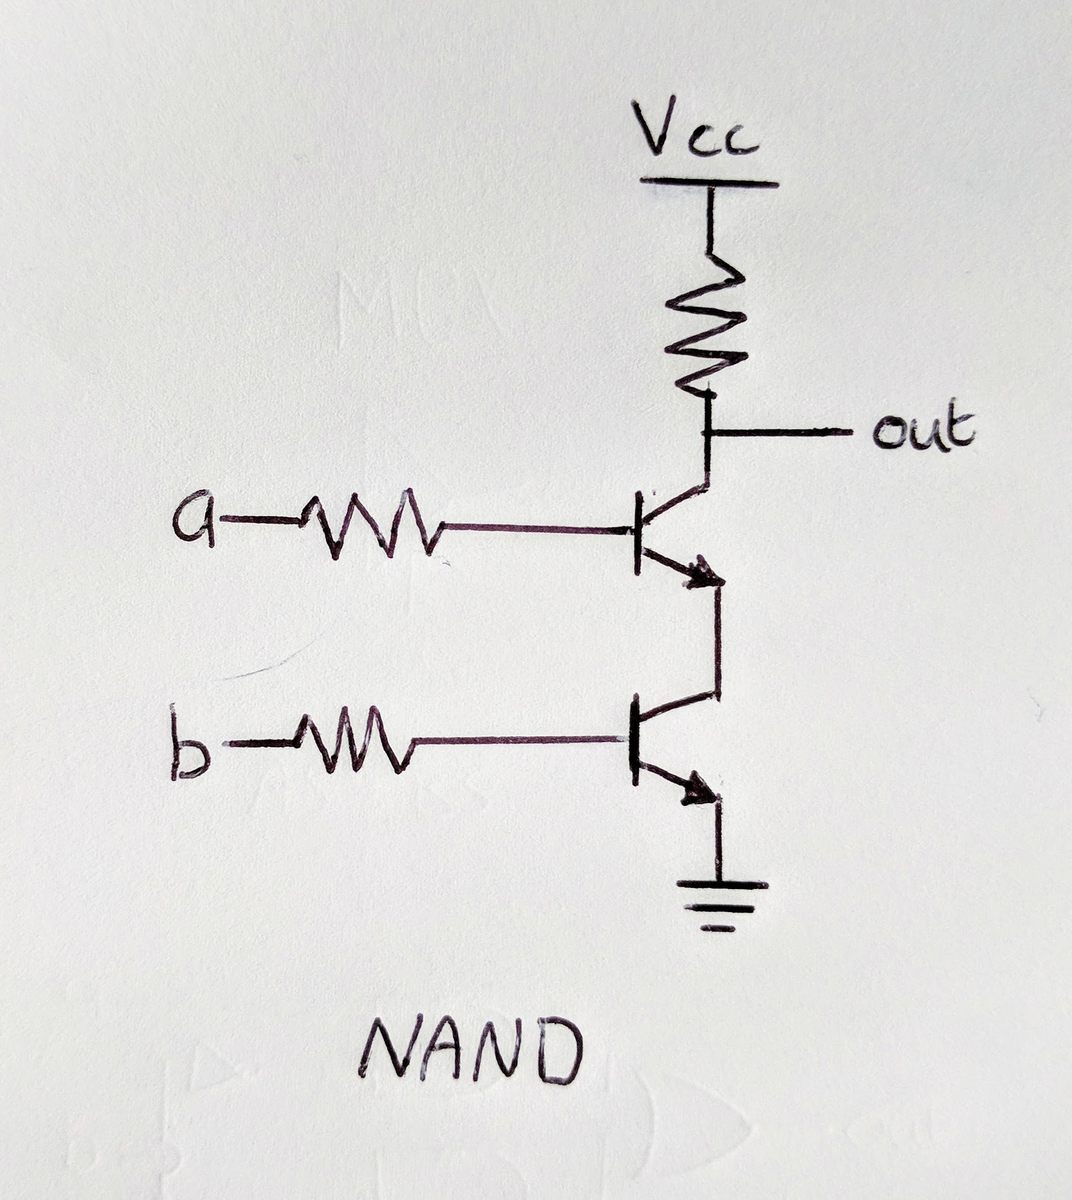 NAND made with transistors